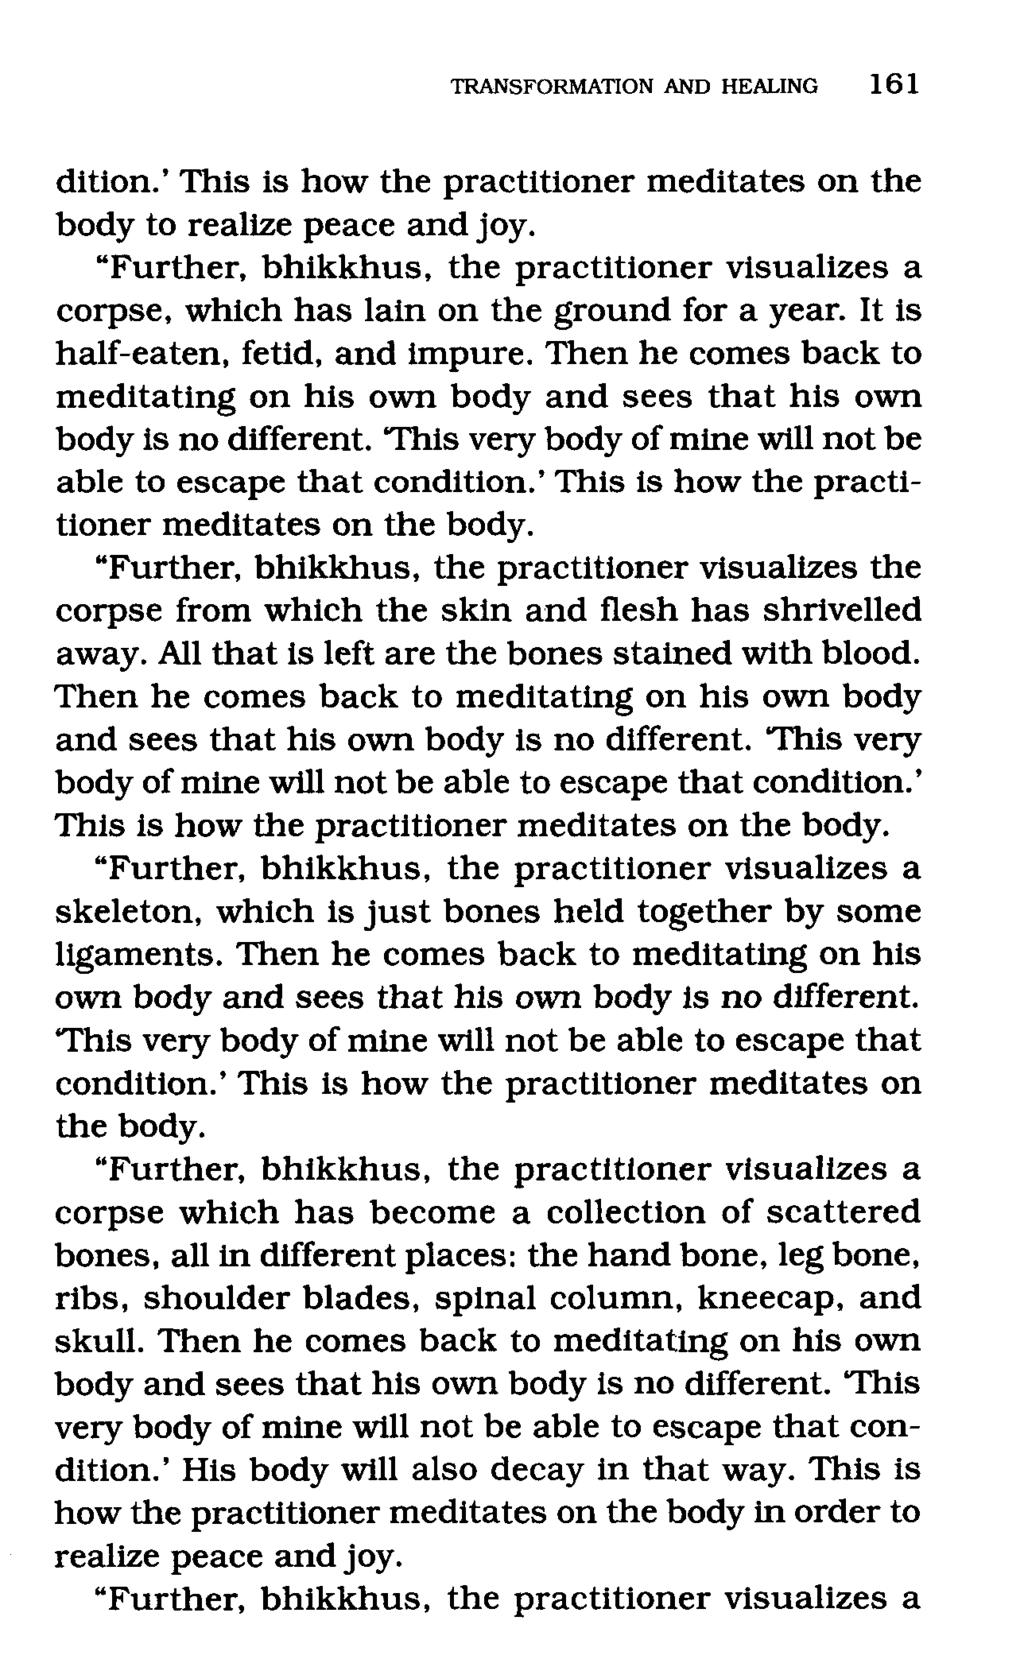 dition.' This is how the practitioner meditates on the body to realize peace and joy. "Further, bhikkhus, the practitioner visualizes a corpse, which has lain on the ground for a year.